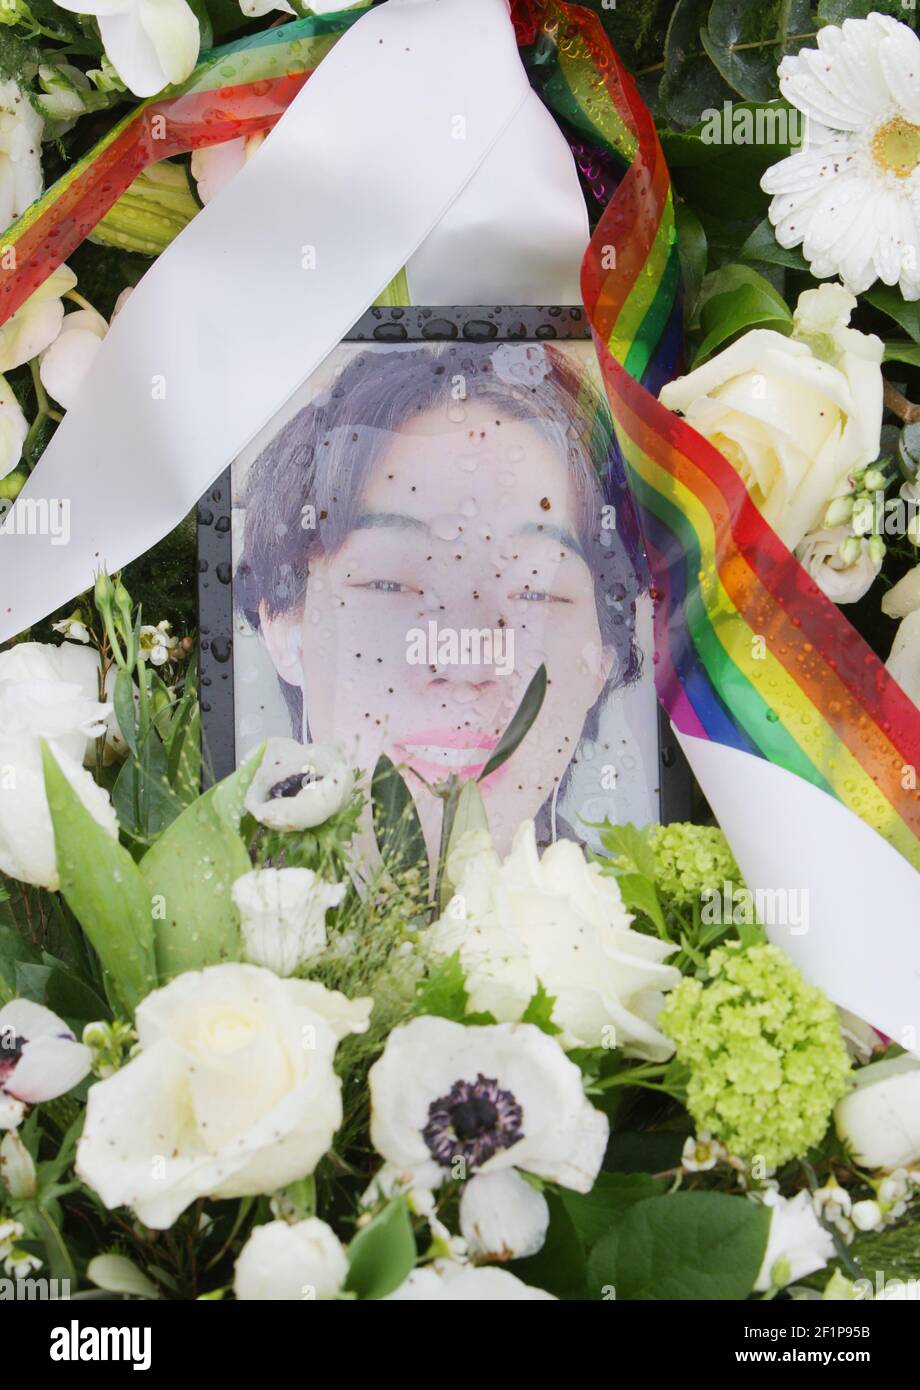 A picture of the activist Xingshun Zhou and flowers placed in memory by LGBT Asylum Support at the Homomonument on March 9, 2021 in Amsterdam, Netherlands. Xingshun Zhou (Marlon) an Chinese activist transwoman 23-year old forced to move from China to seek asylum in the Netherlands, because of the systematic homophobic and sexist repression against LGBTQIA  Community, died by suicide on February 26, 2021 at Echt village after her asylum application was denied by immigration authorities in the Netherlands. (Photo by Paulo Amorim/Sipa USA) Stock Photo